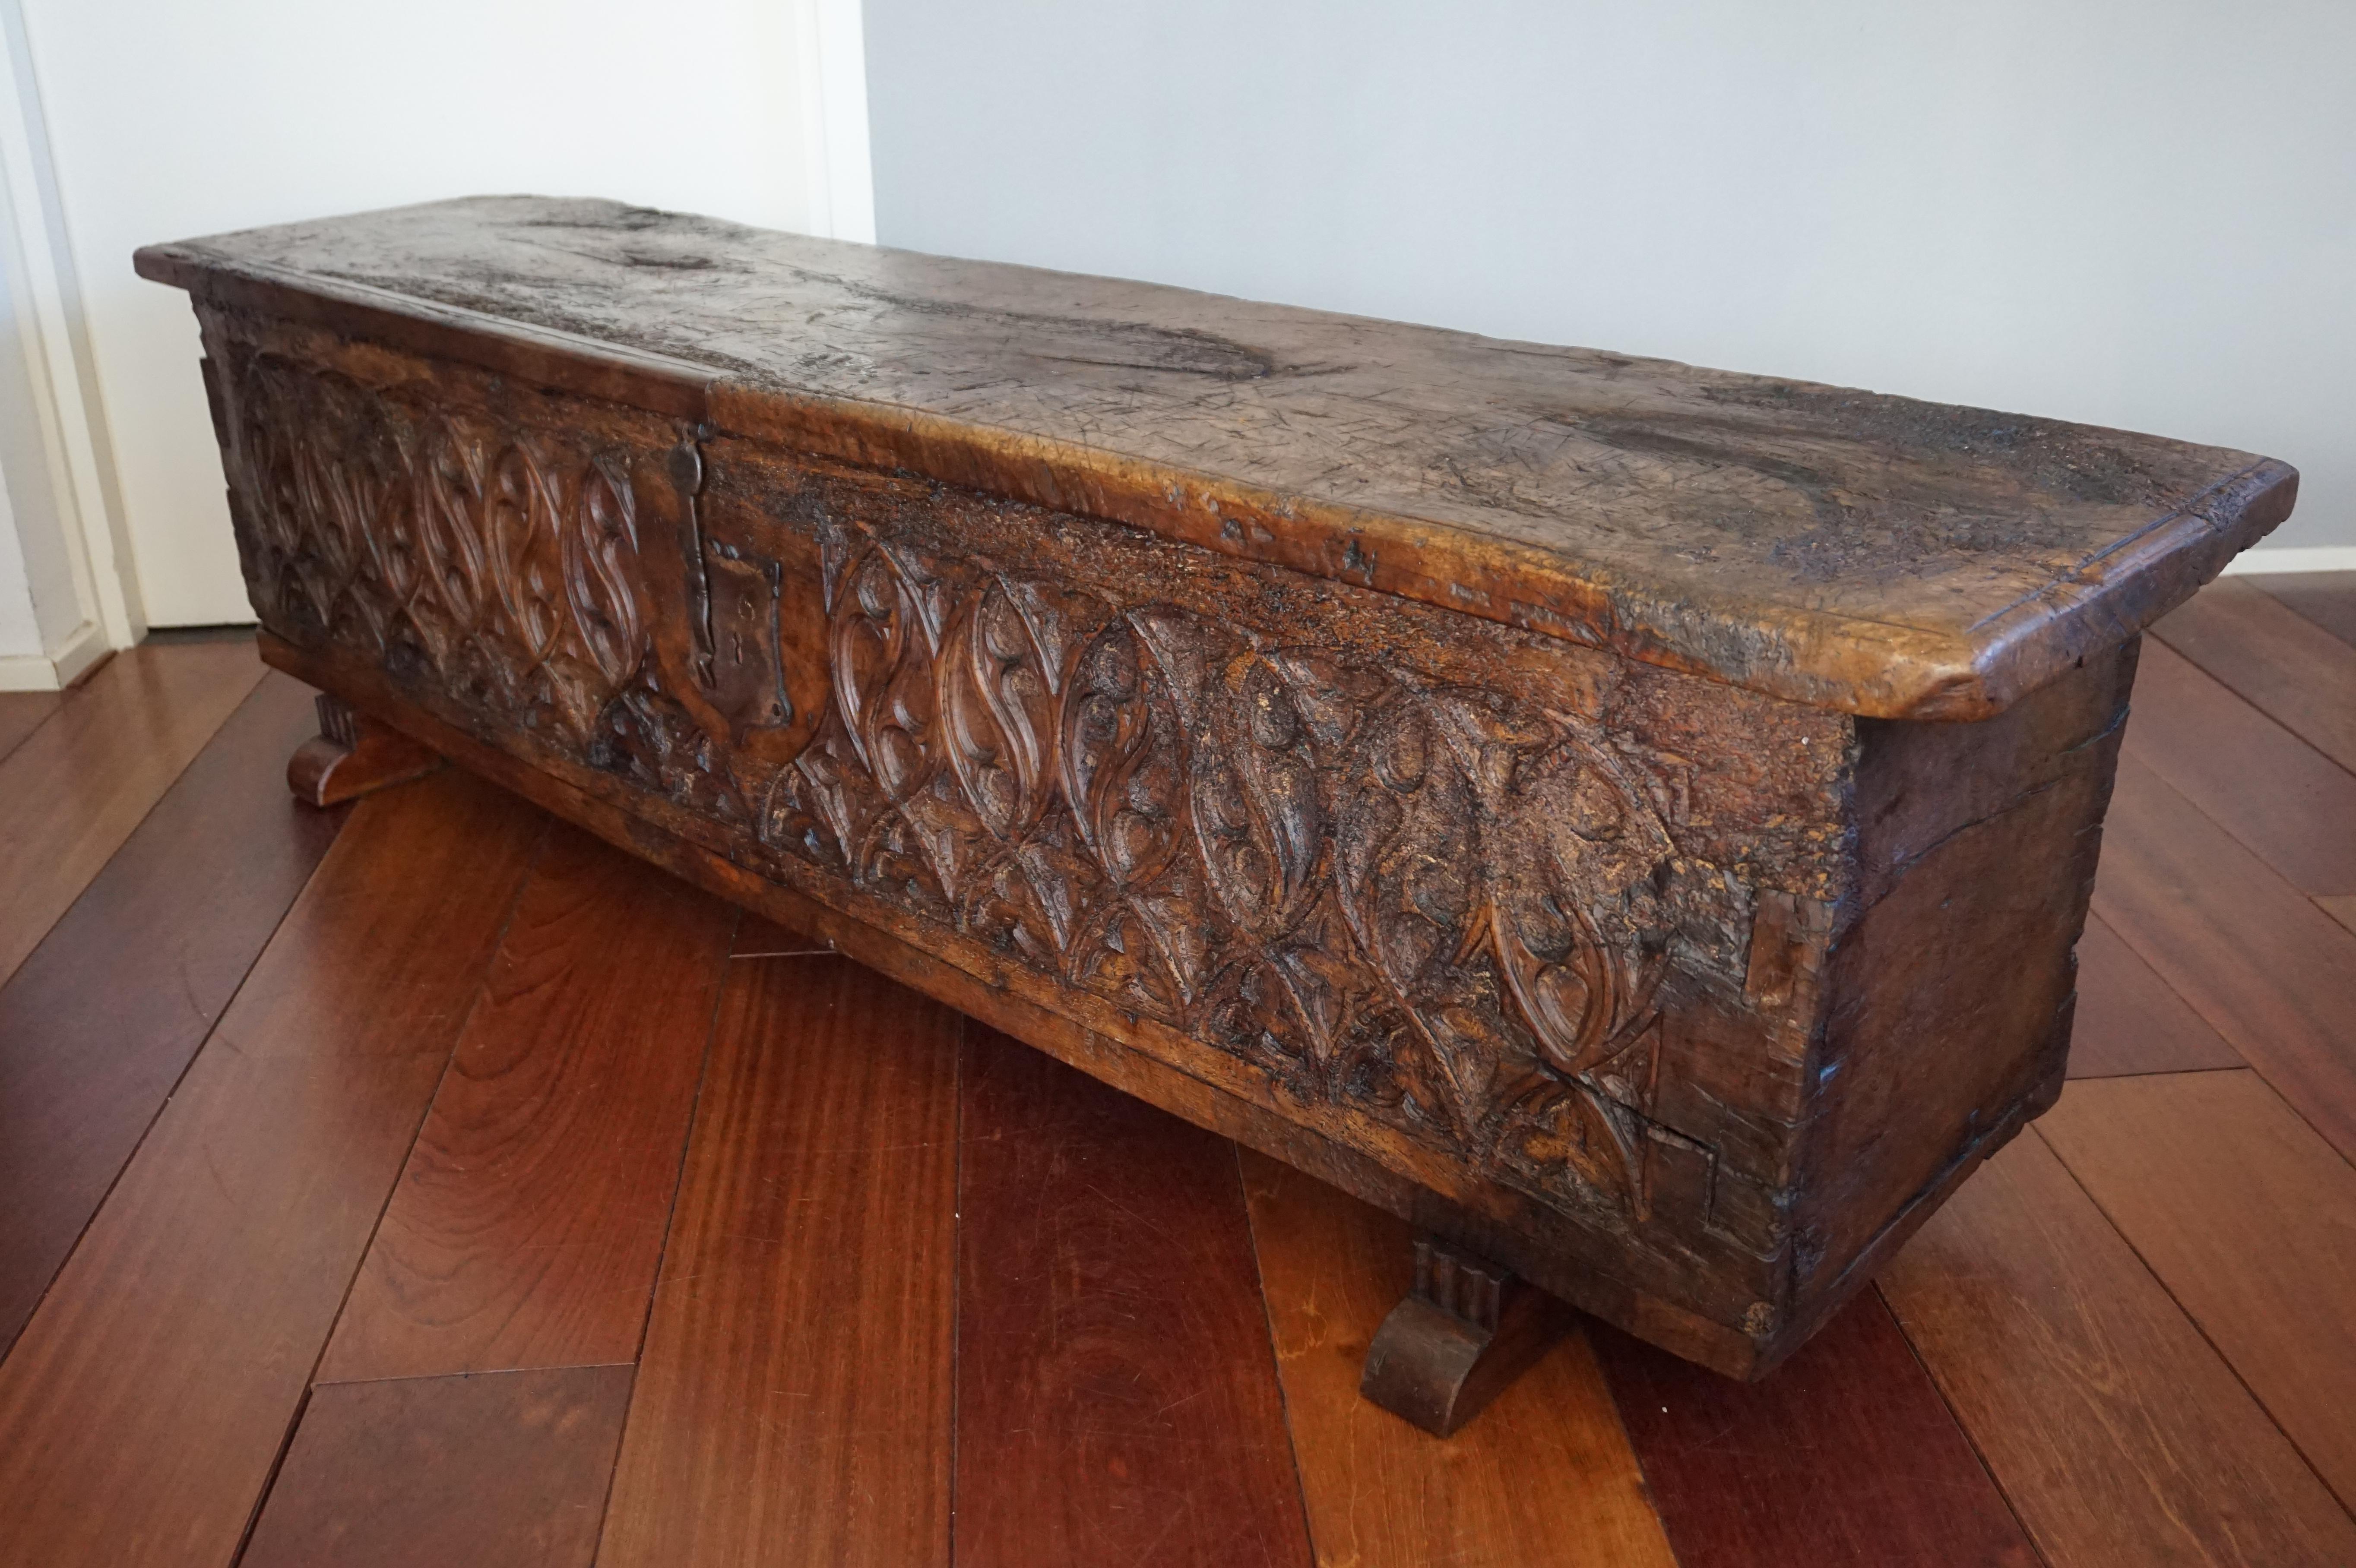 Forged Unique 16th Century, Hand Carved French Gothic Revival Nutwood Blanket Chest